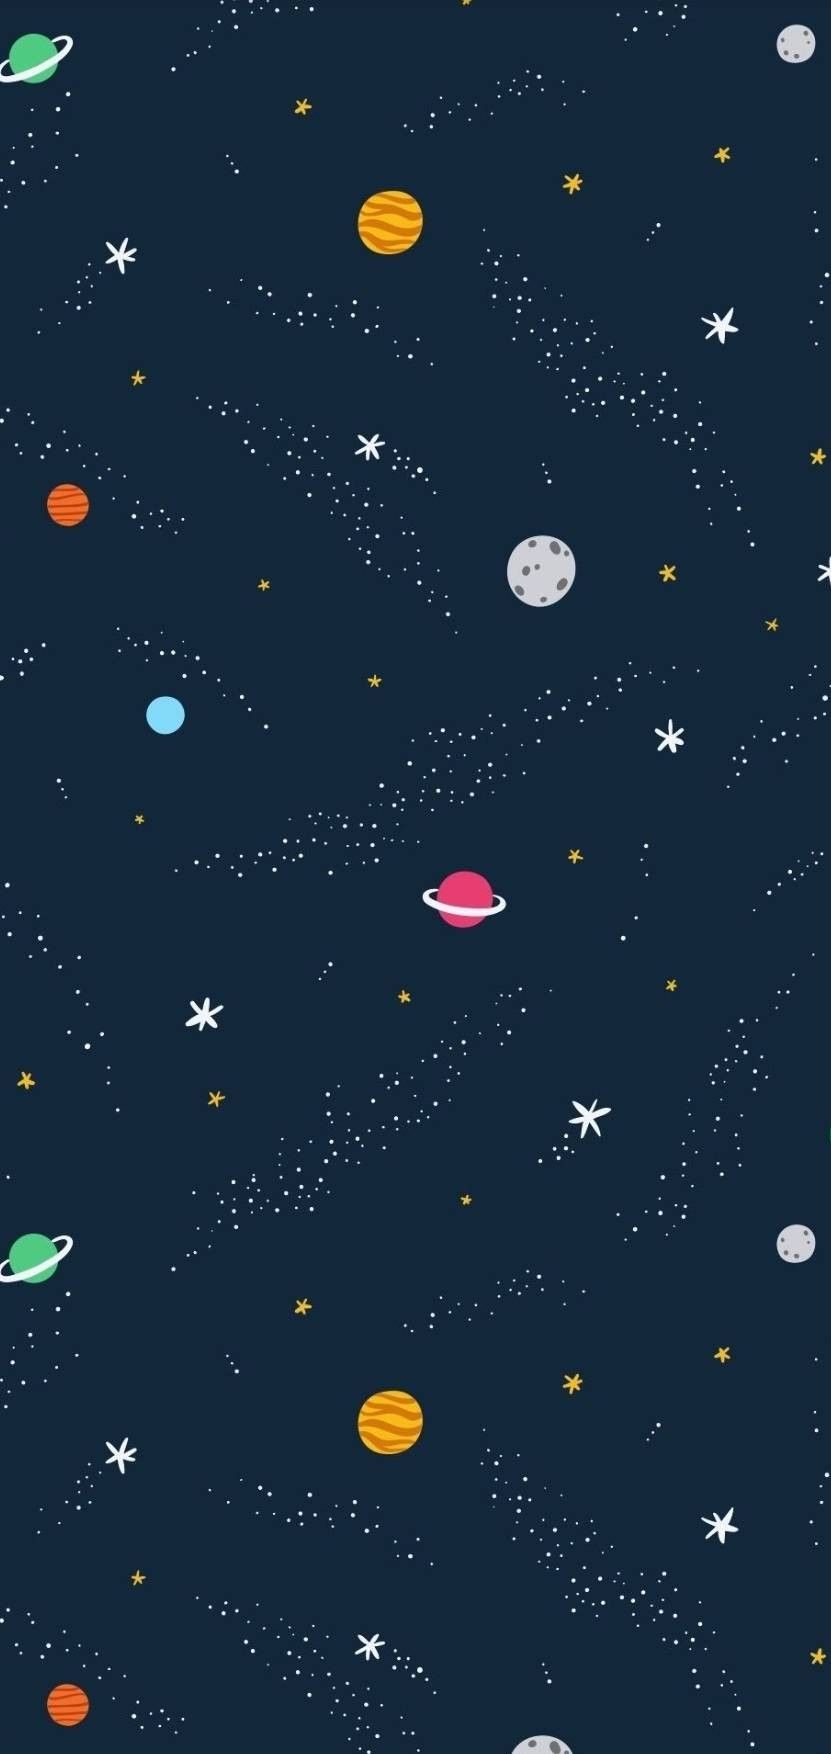 IPhone wallpaper of the stars and planets in the universe - Phone